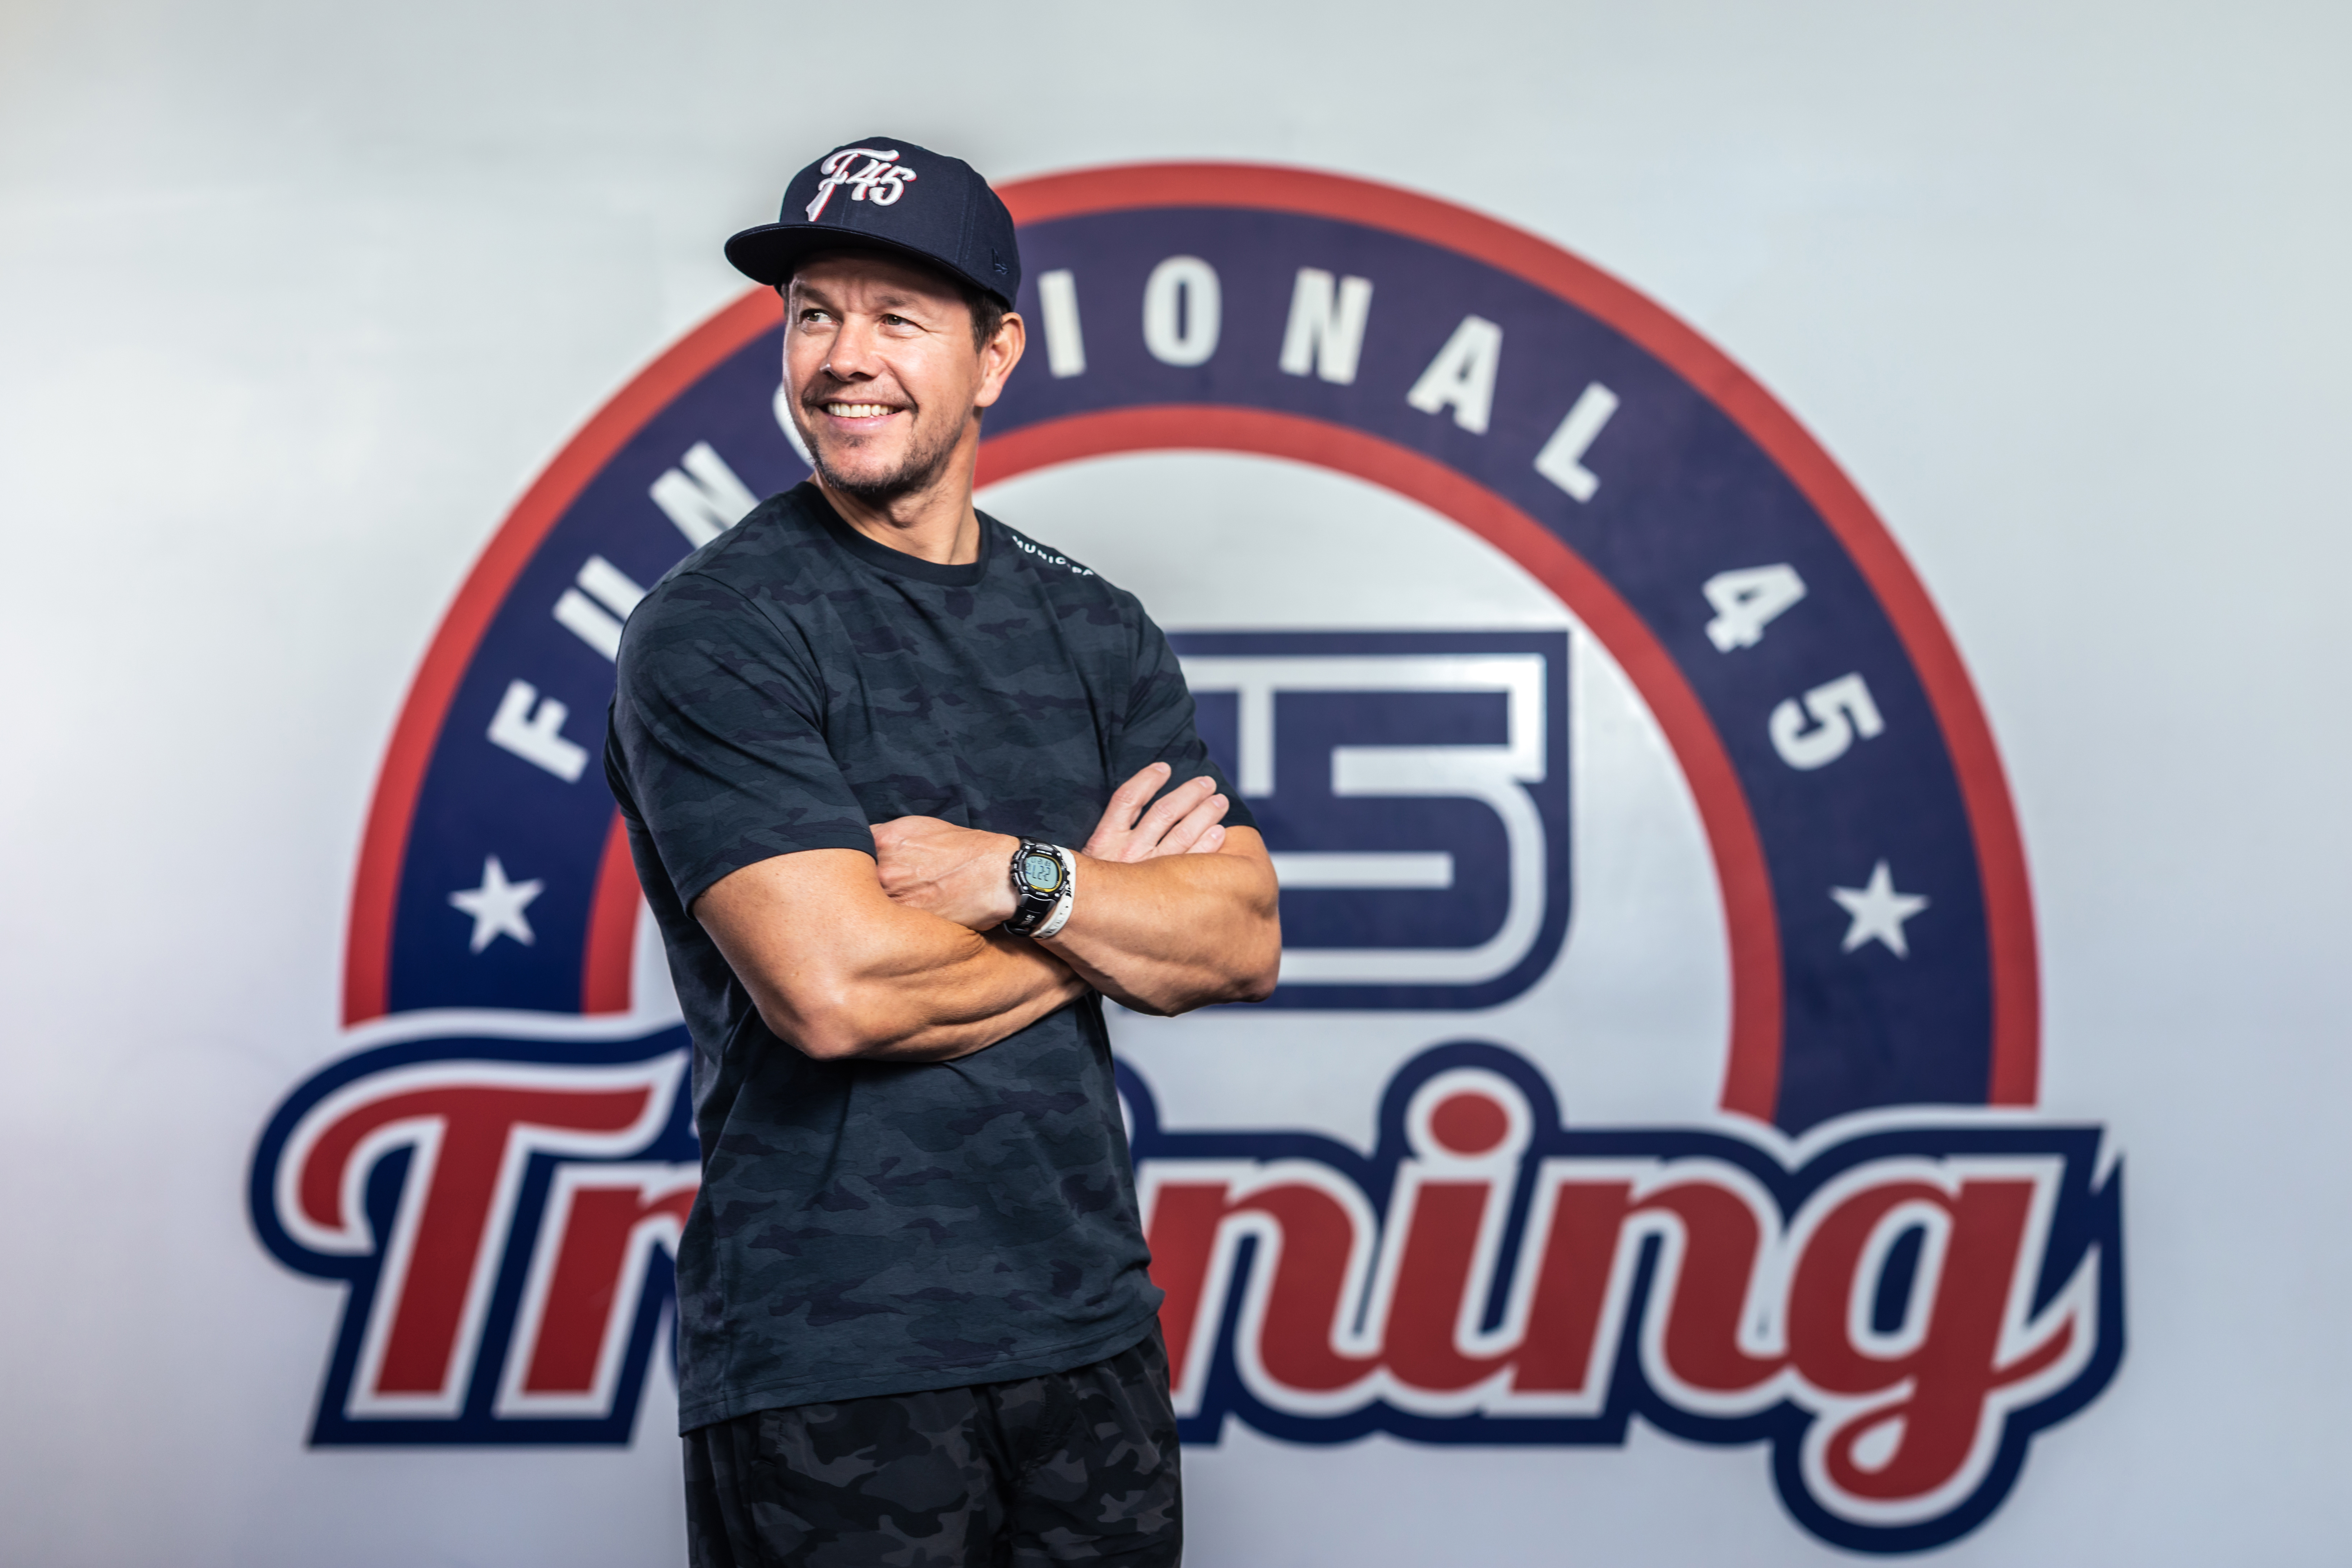 Mark Wahlberg Enters Exclusive Partnership to Open F45 Training Studios Across Boston | Business Wire